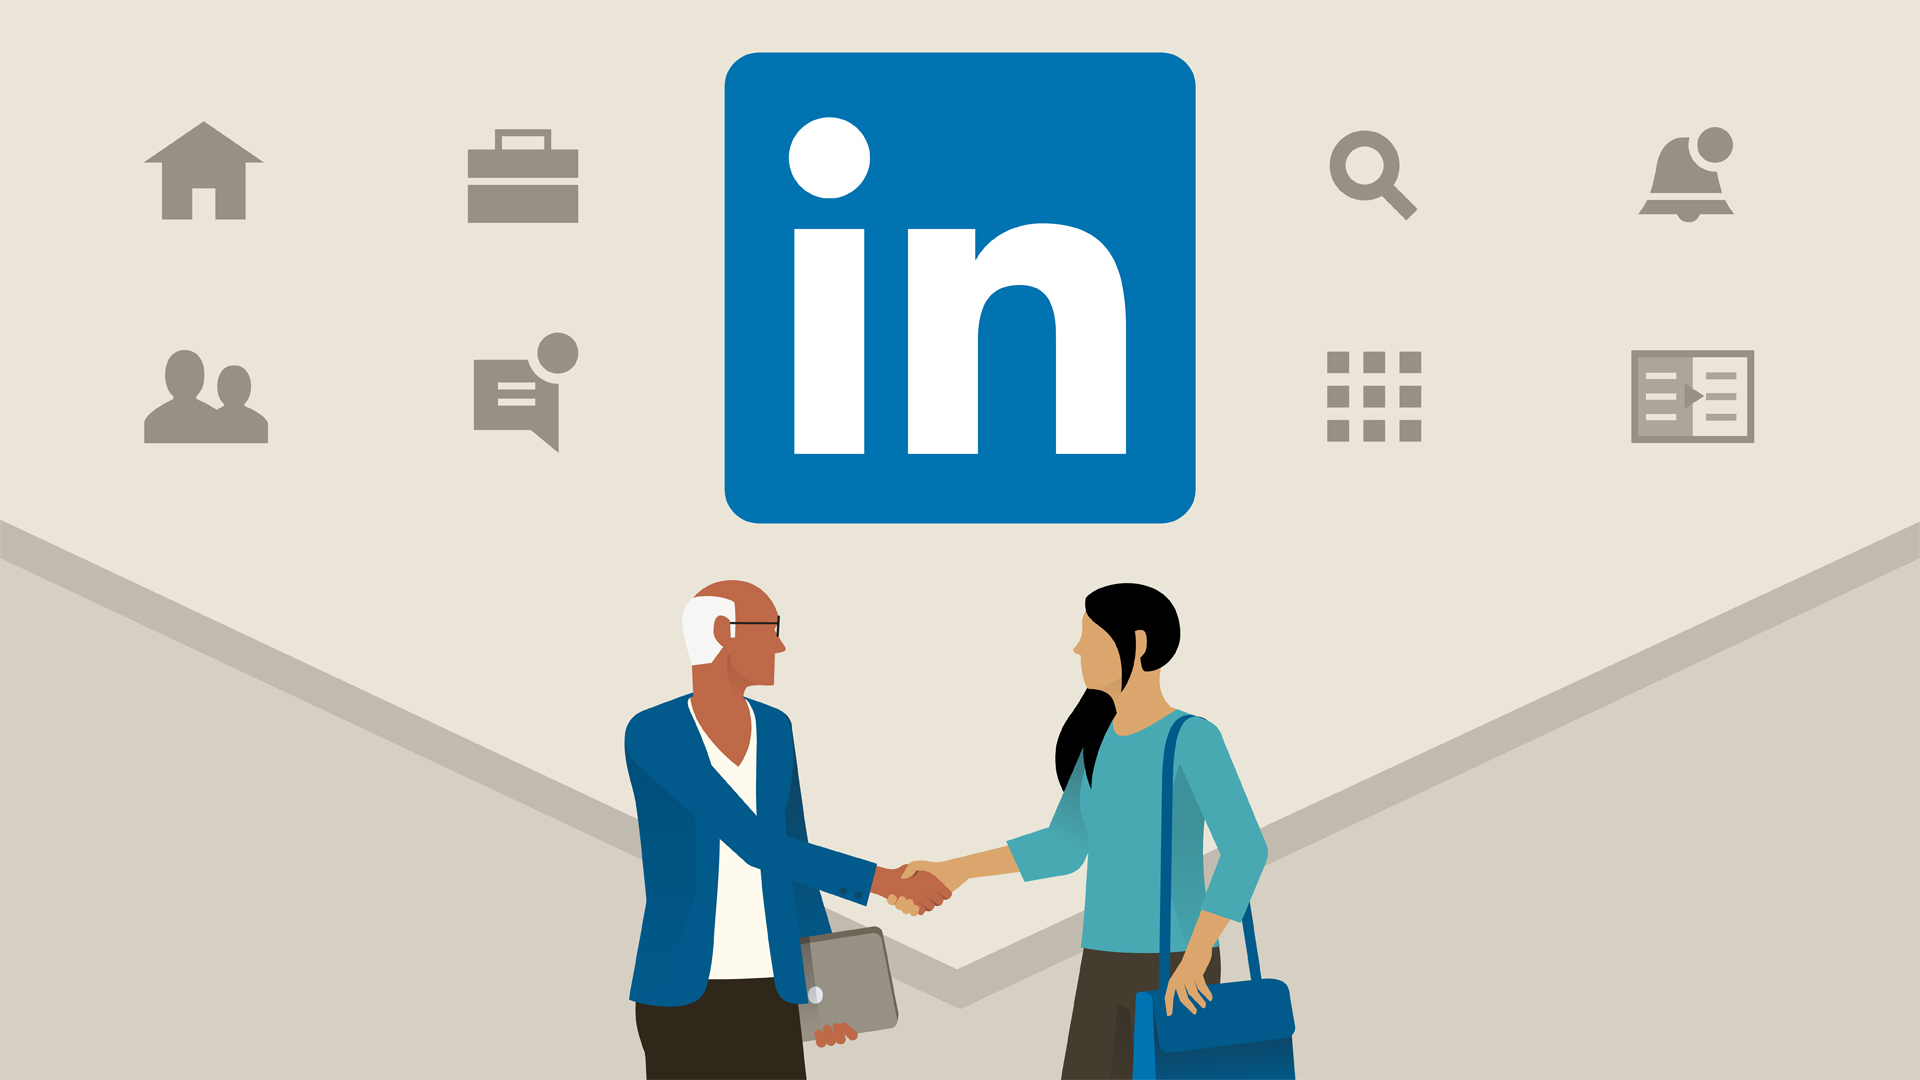 How to change Talks About on LinkedIn